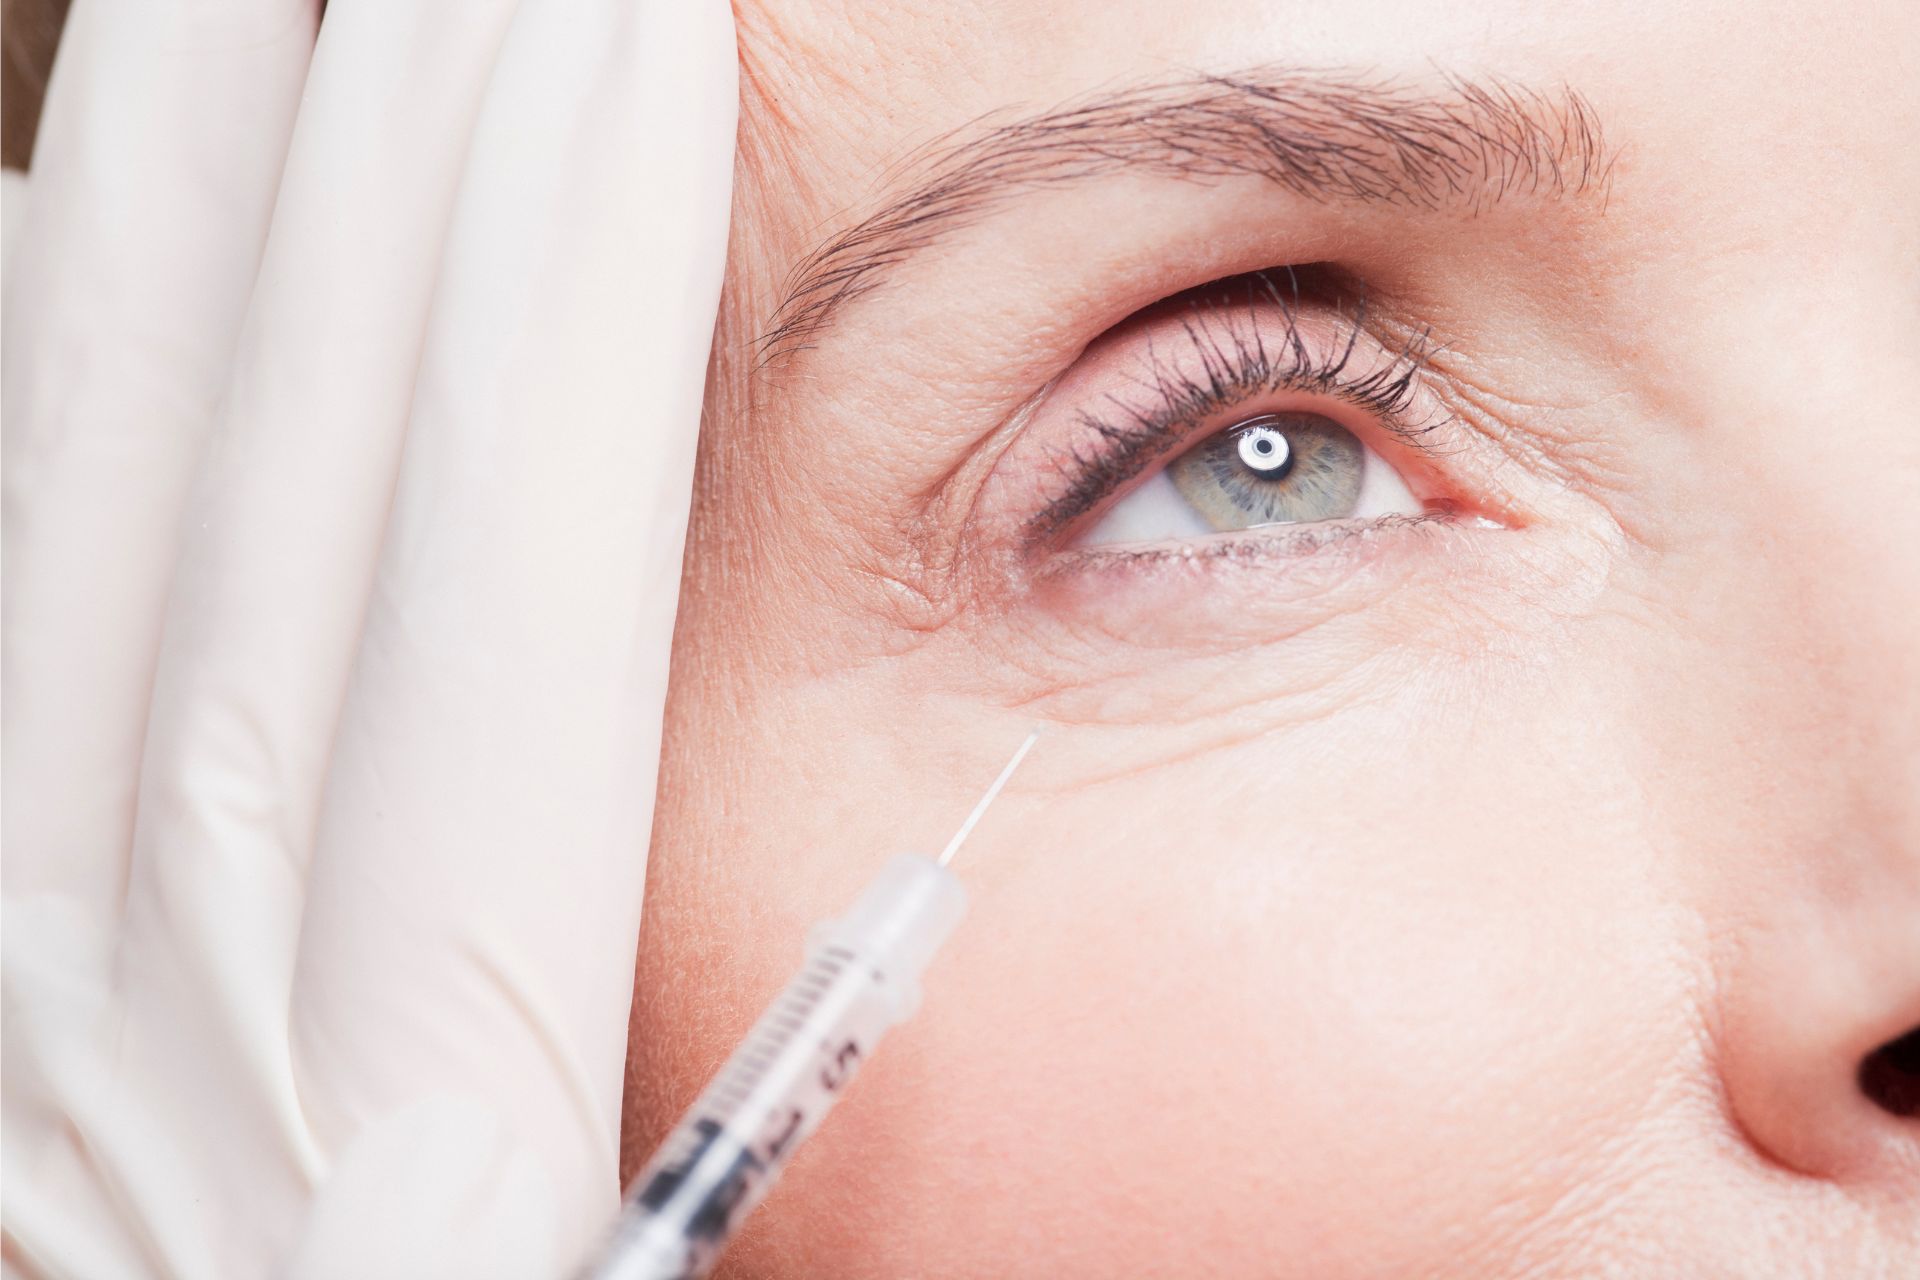 An older person getting filler injection in between her upper cheeks and lower eyelid